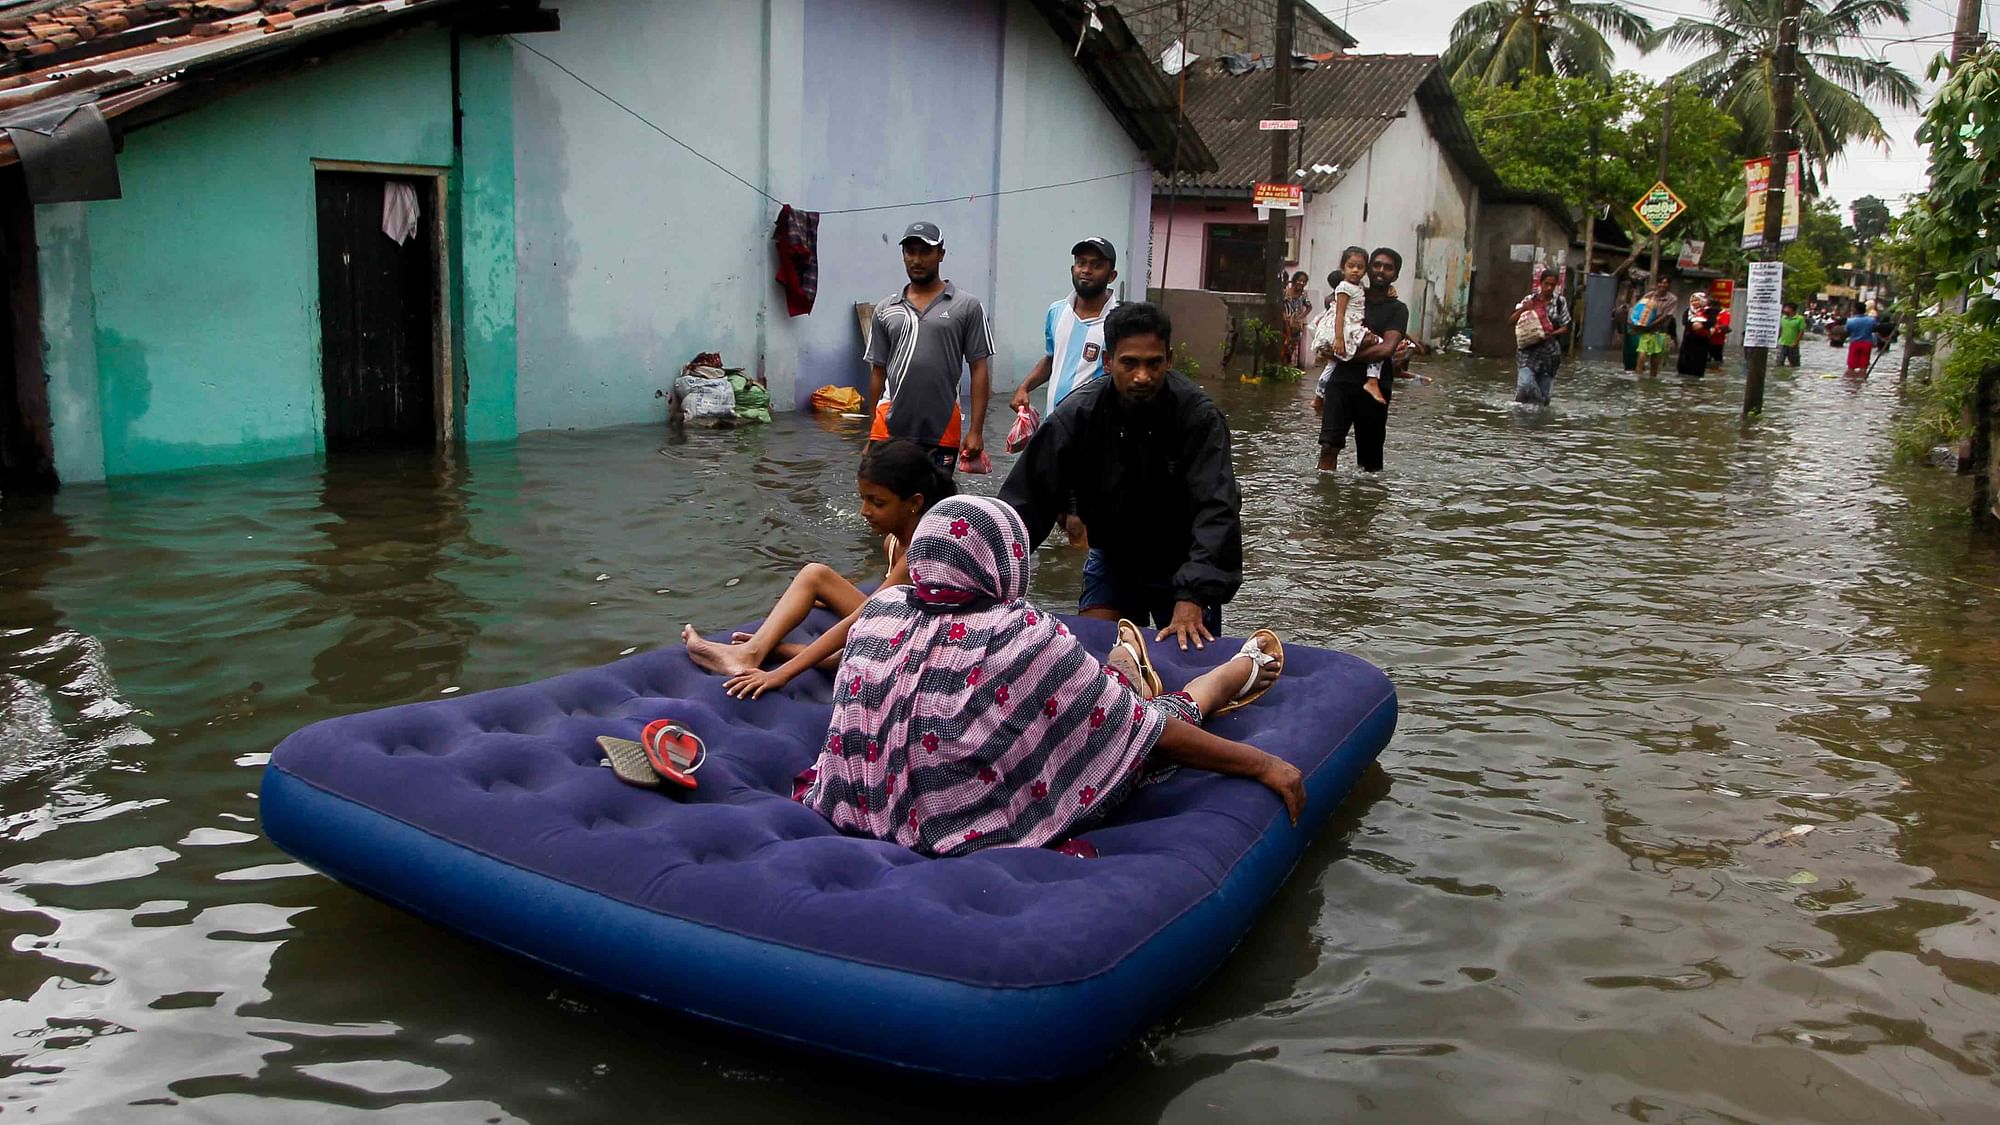 An elderly woman and girl being shifted on a mattress in flood-hit Colombo. (Photo: AP)